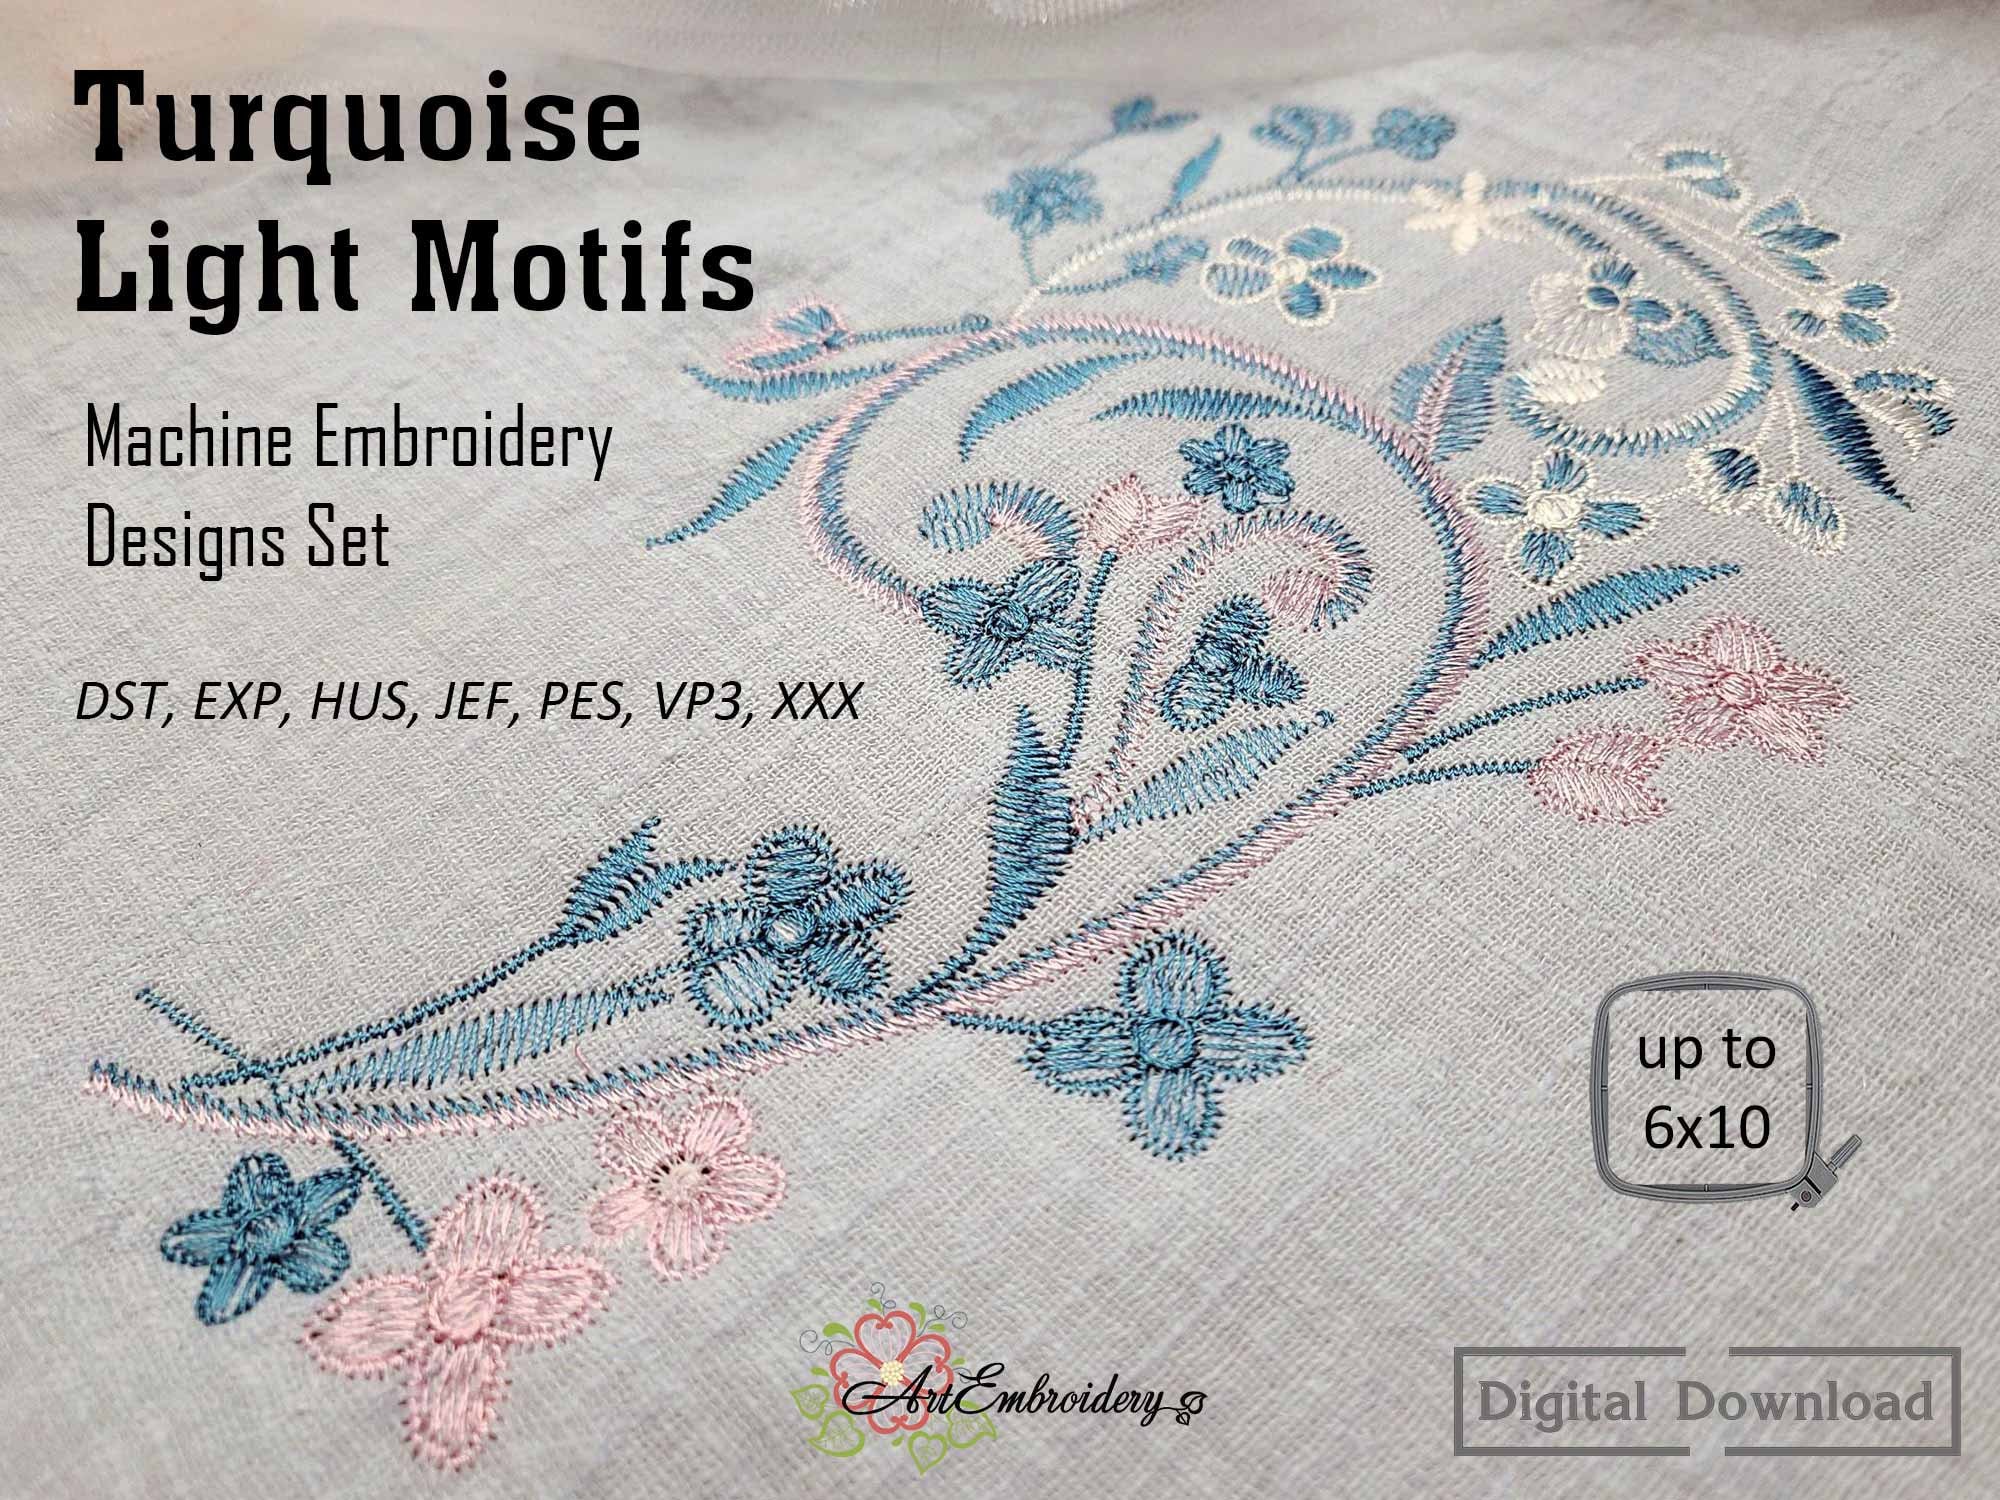 Turquoise Light Motifs Machine Embroidery Designs Set From Hoop 4x4 and up  to 6x10 -  Israel